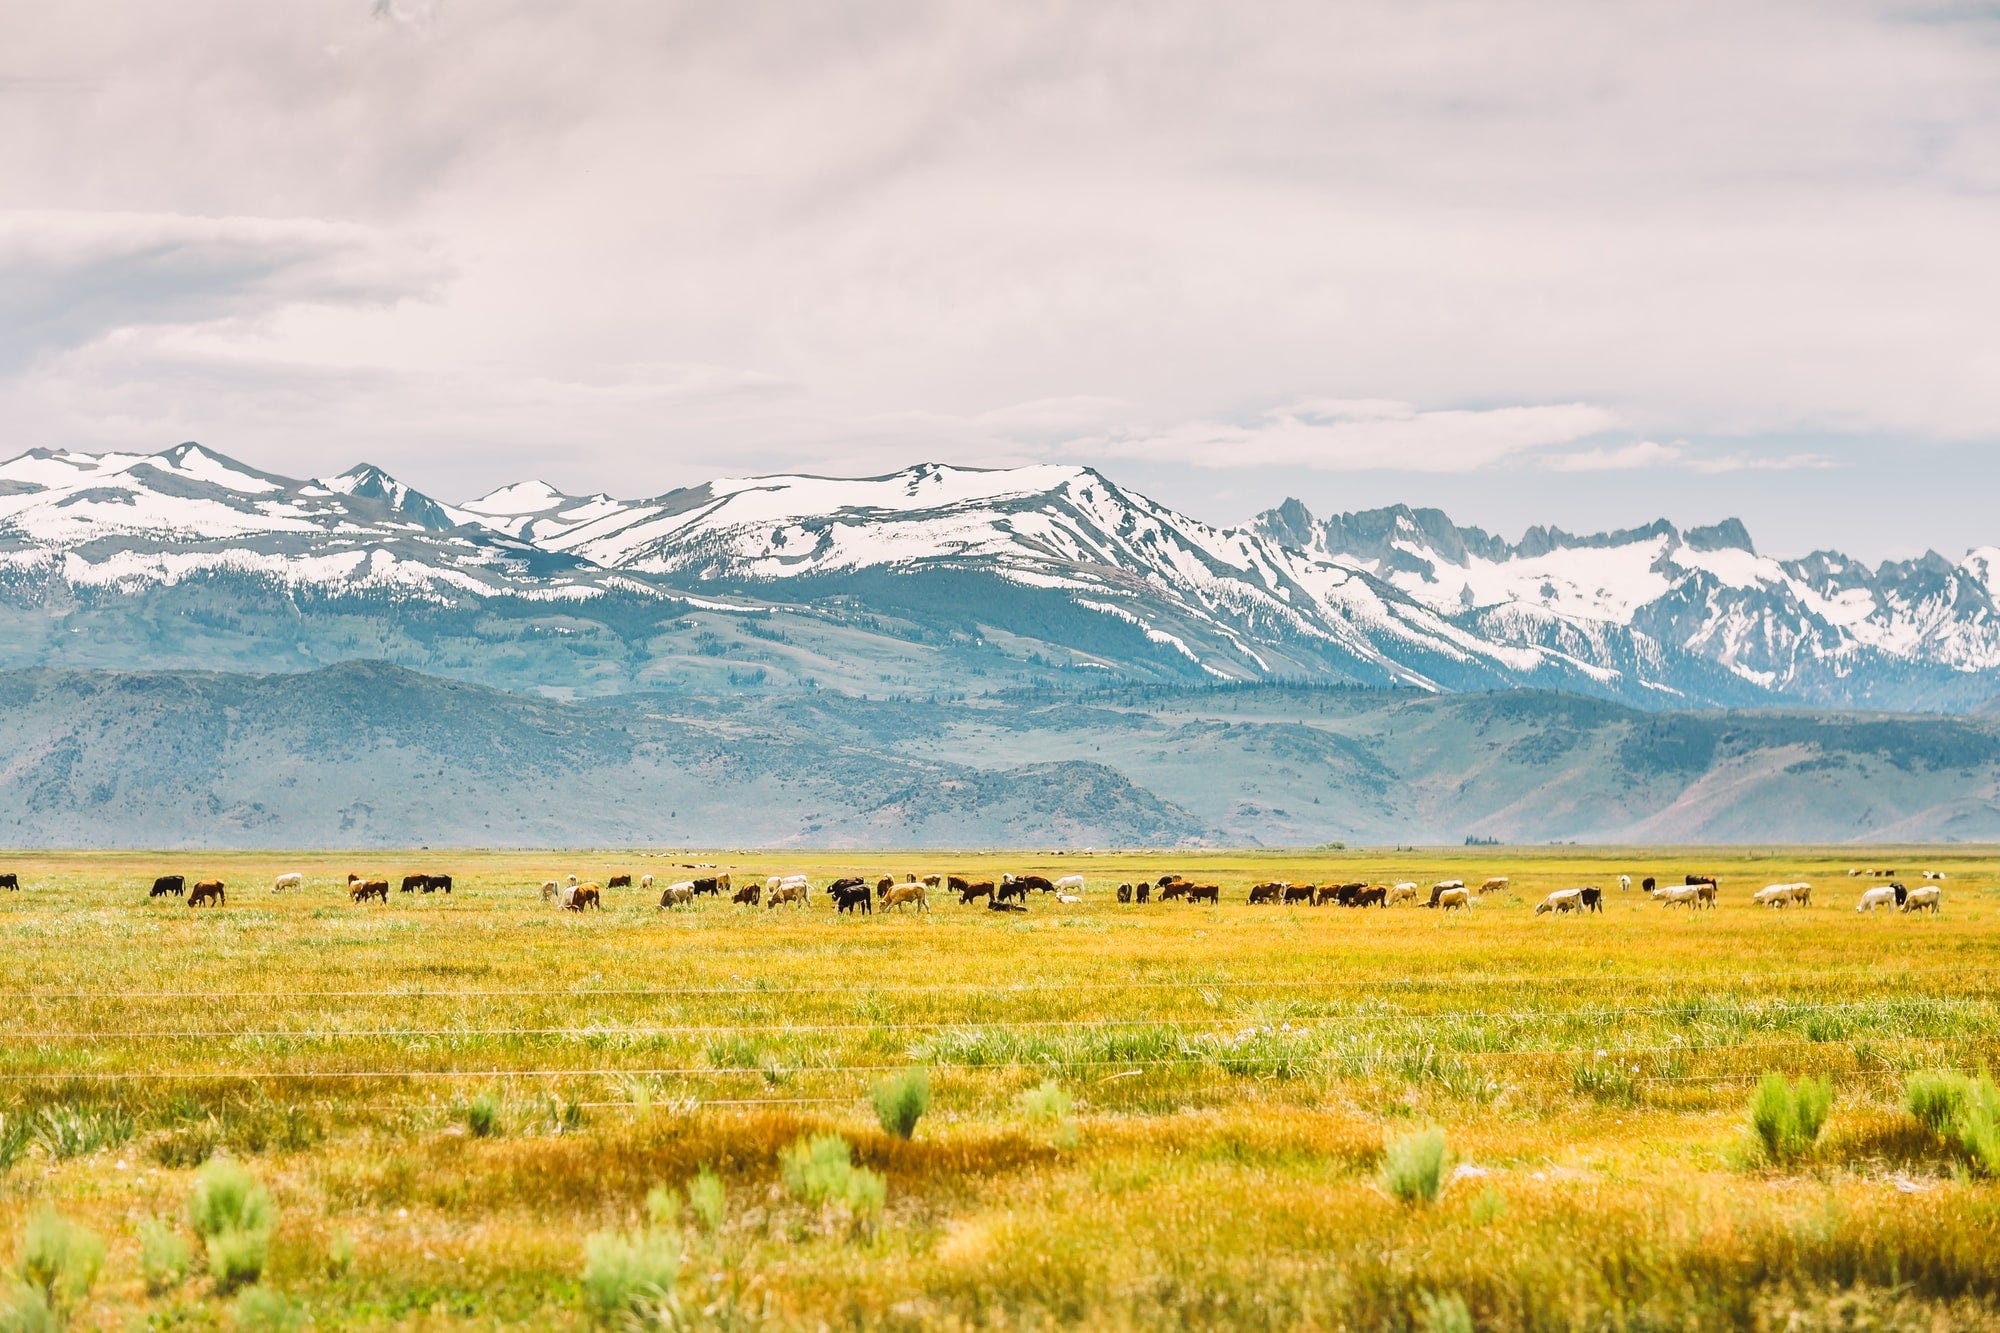 Cows in field by mountains